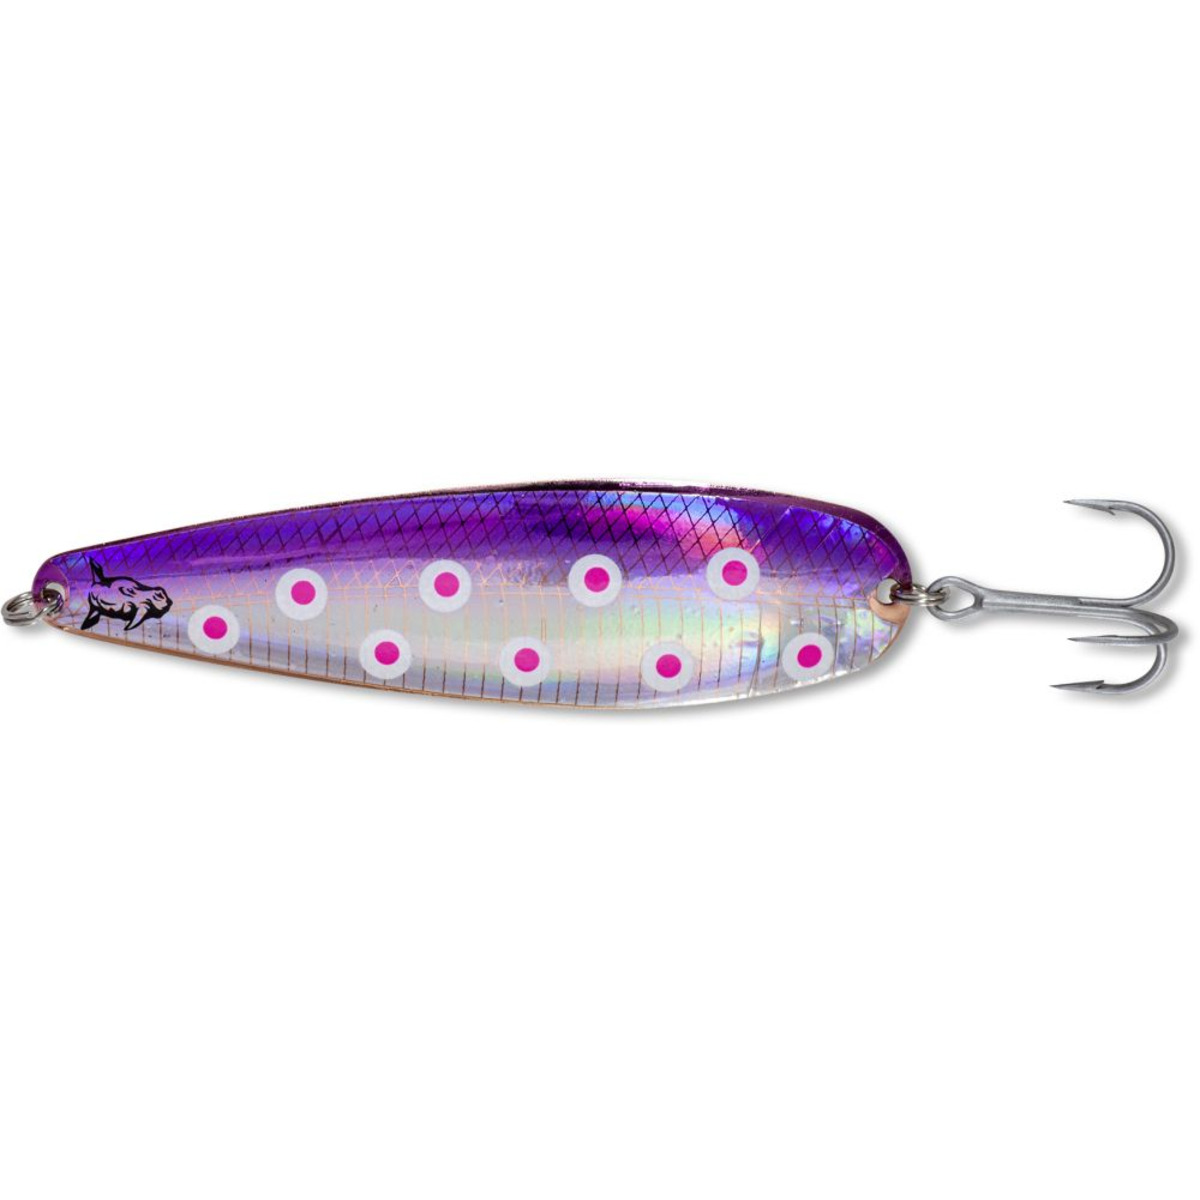 Rhino Trolling Spoons - 16 g - old witch